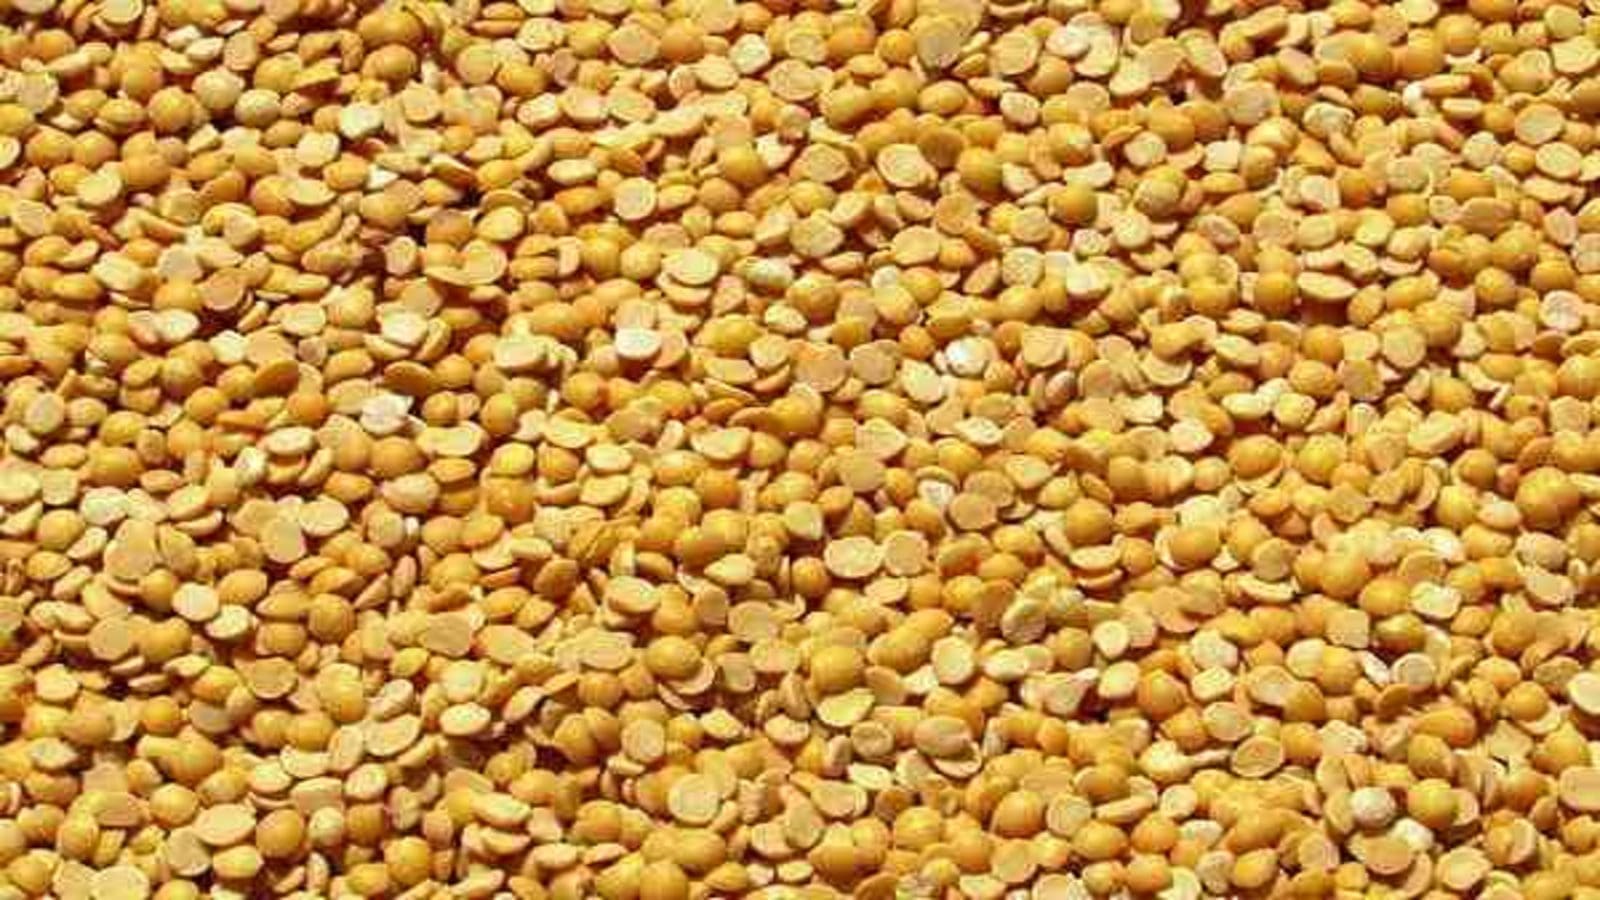 Malawian pigeon peas farmers to reap big as India waives 50,000 tonnes quota